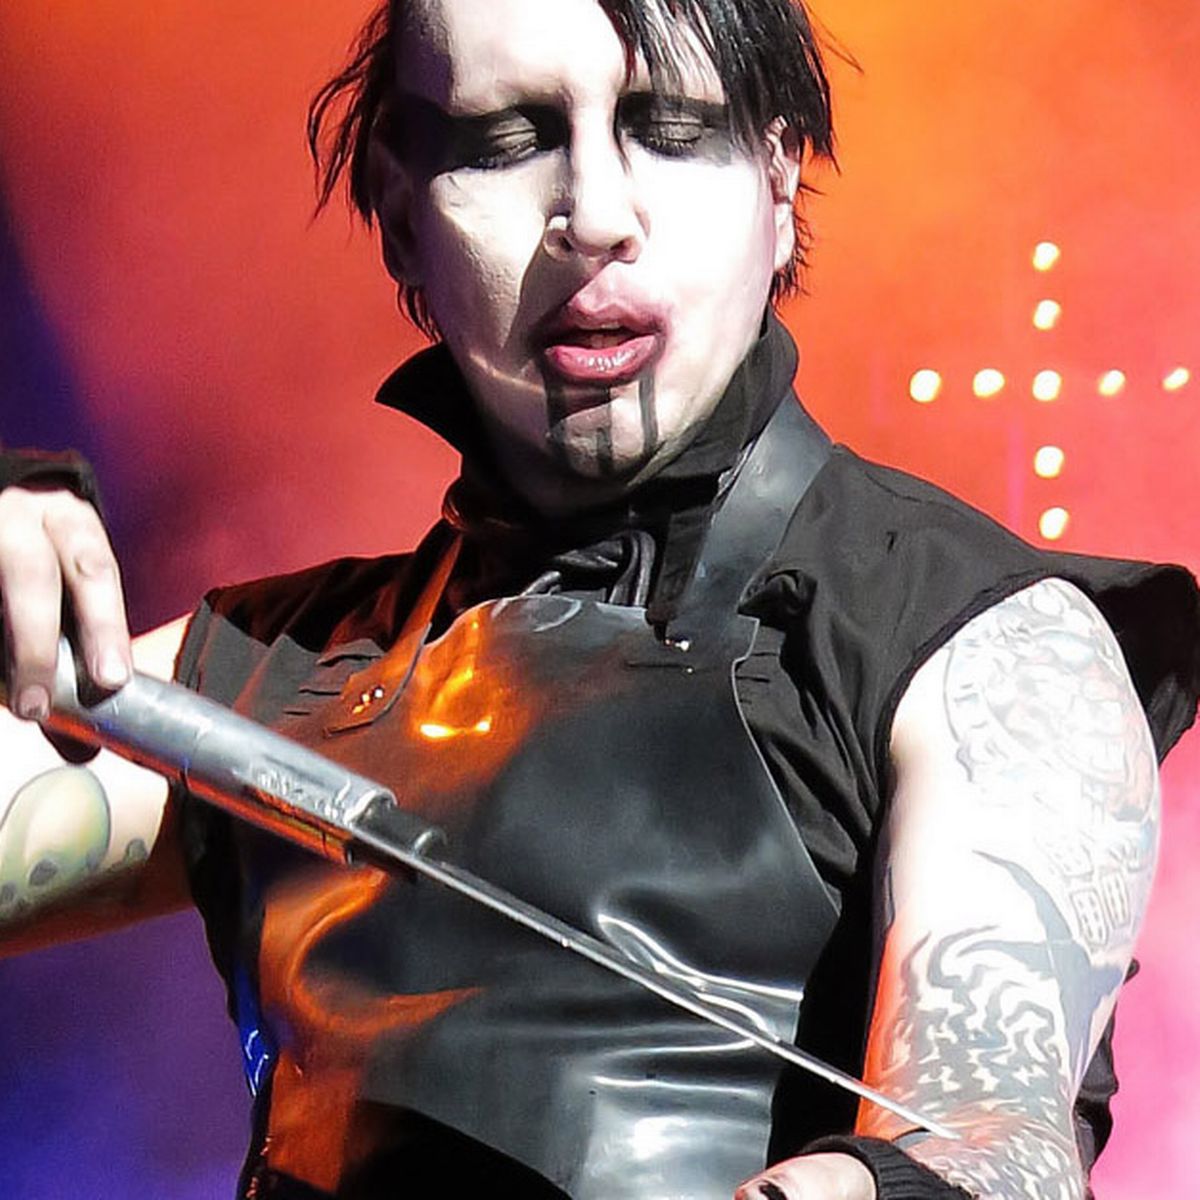 Marilyn Manson's Role Cut from Stephen King's The Stand Miniseries